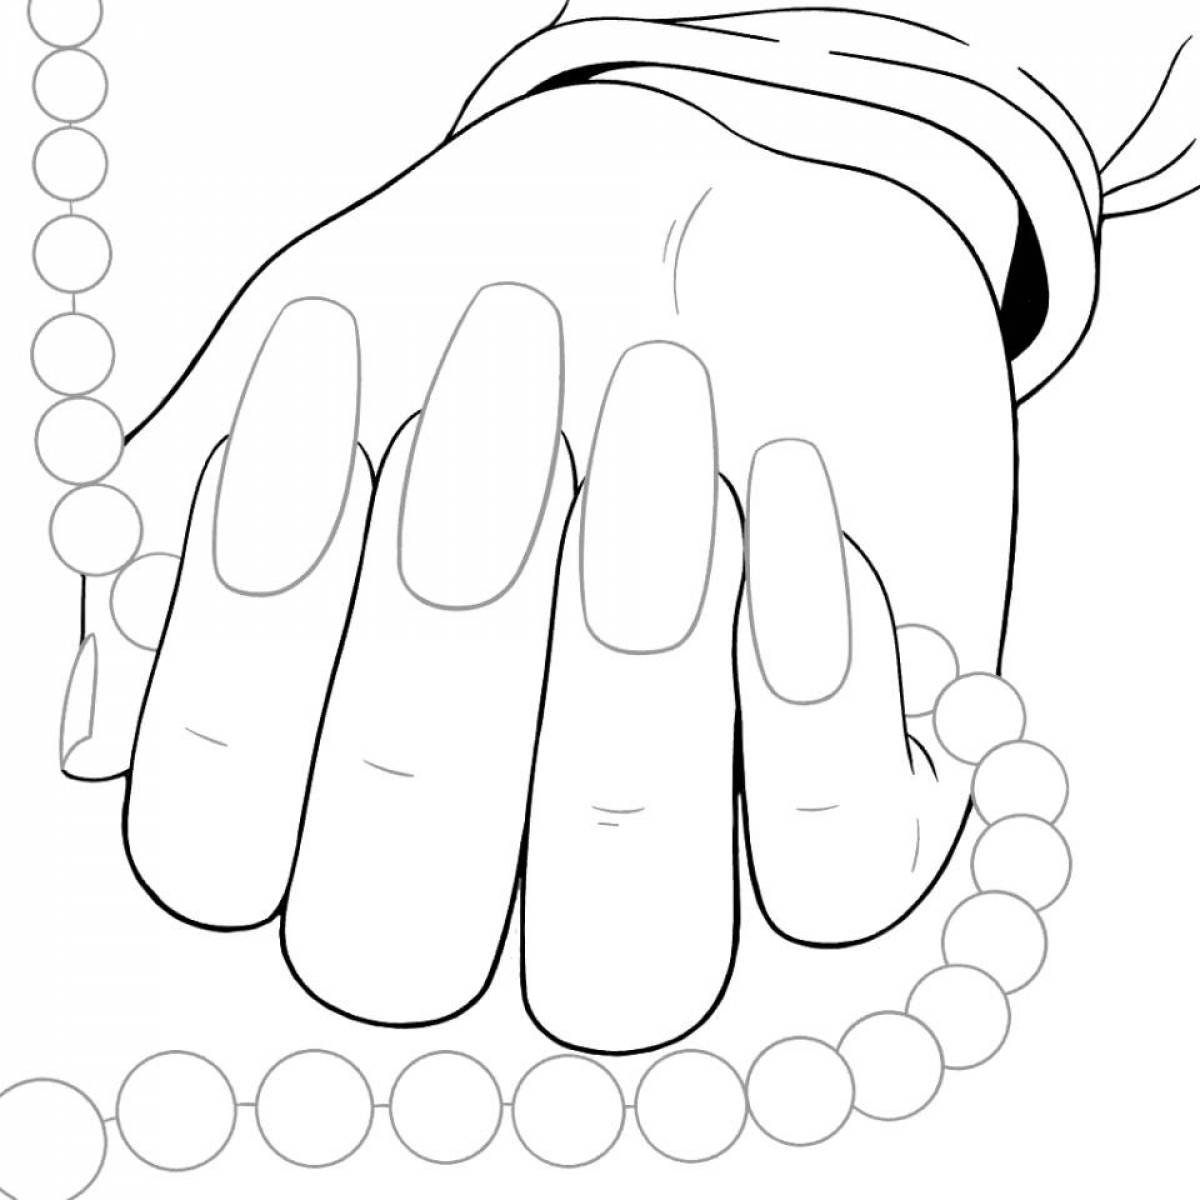 Impressive hand with nails coloring page